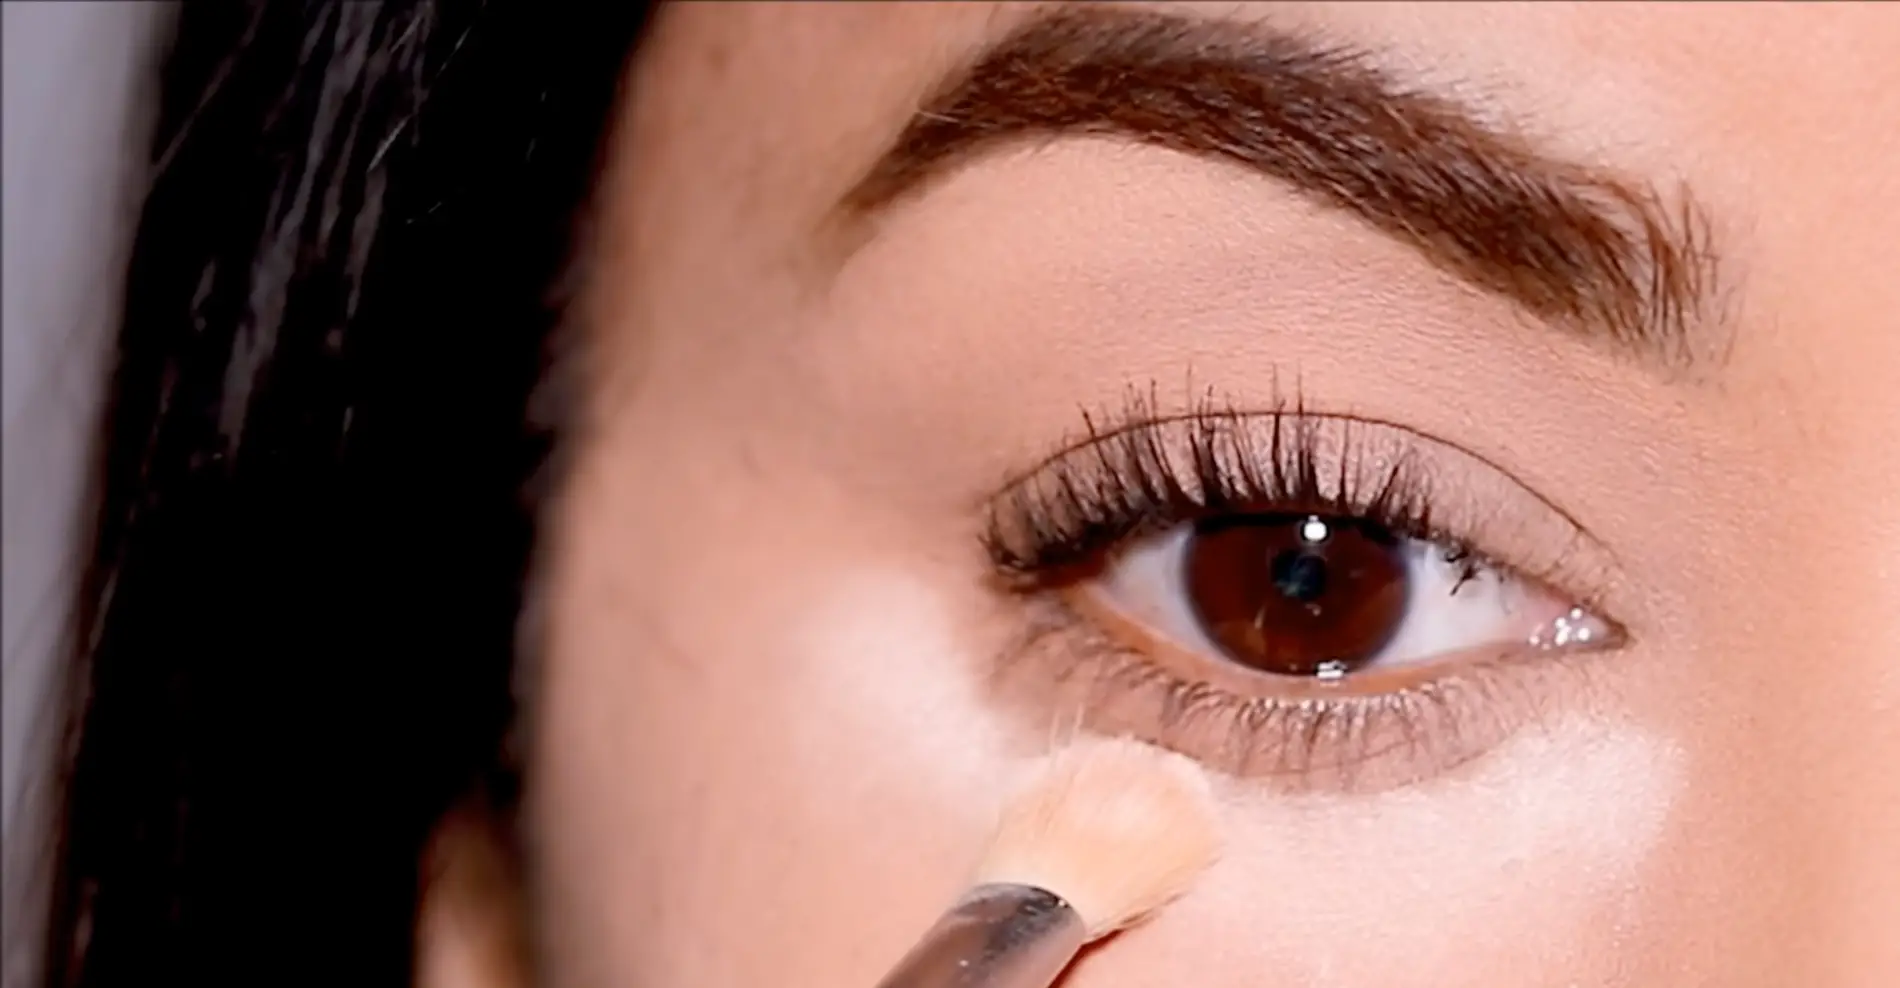 Can Concealers Cover Up Mascara Smudges?